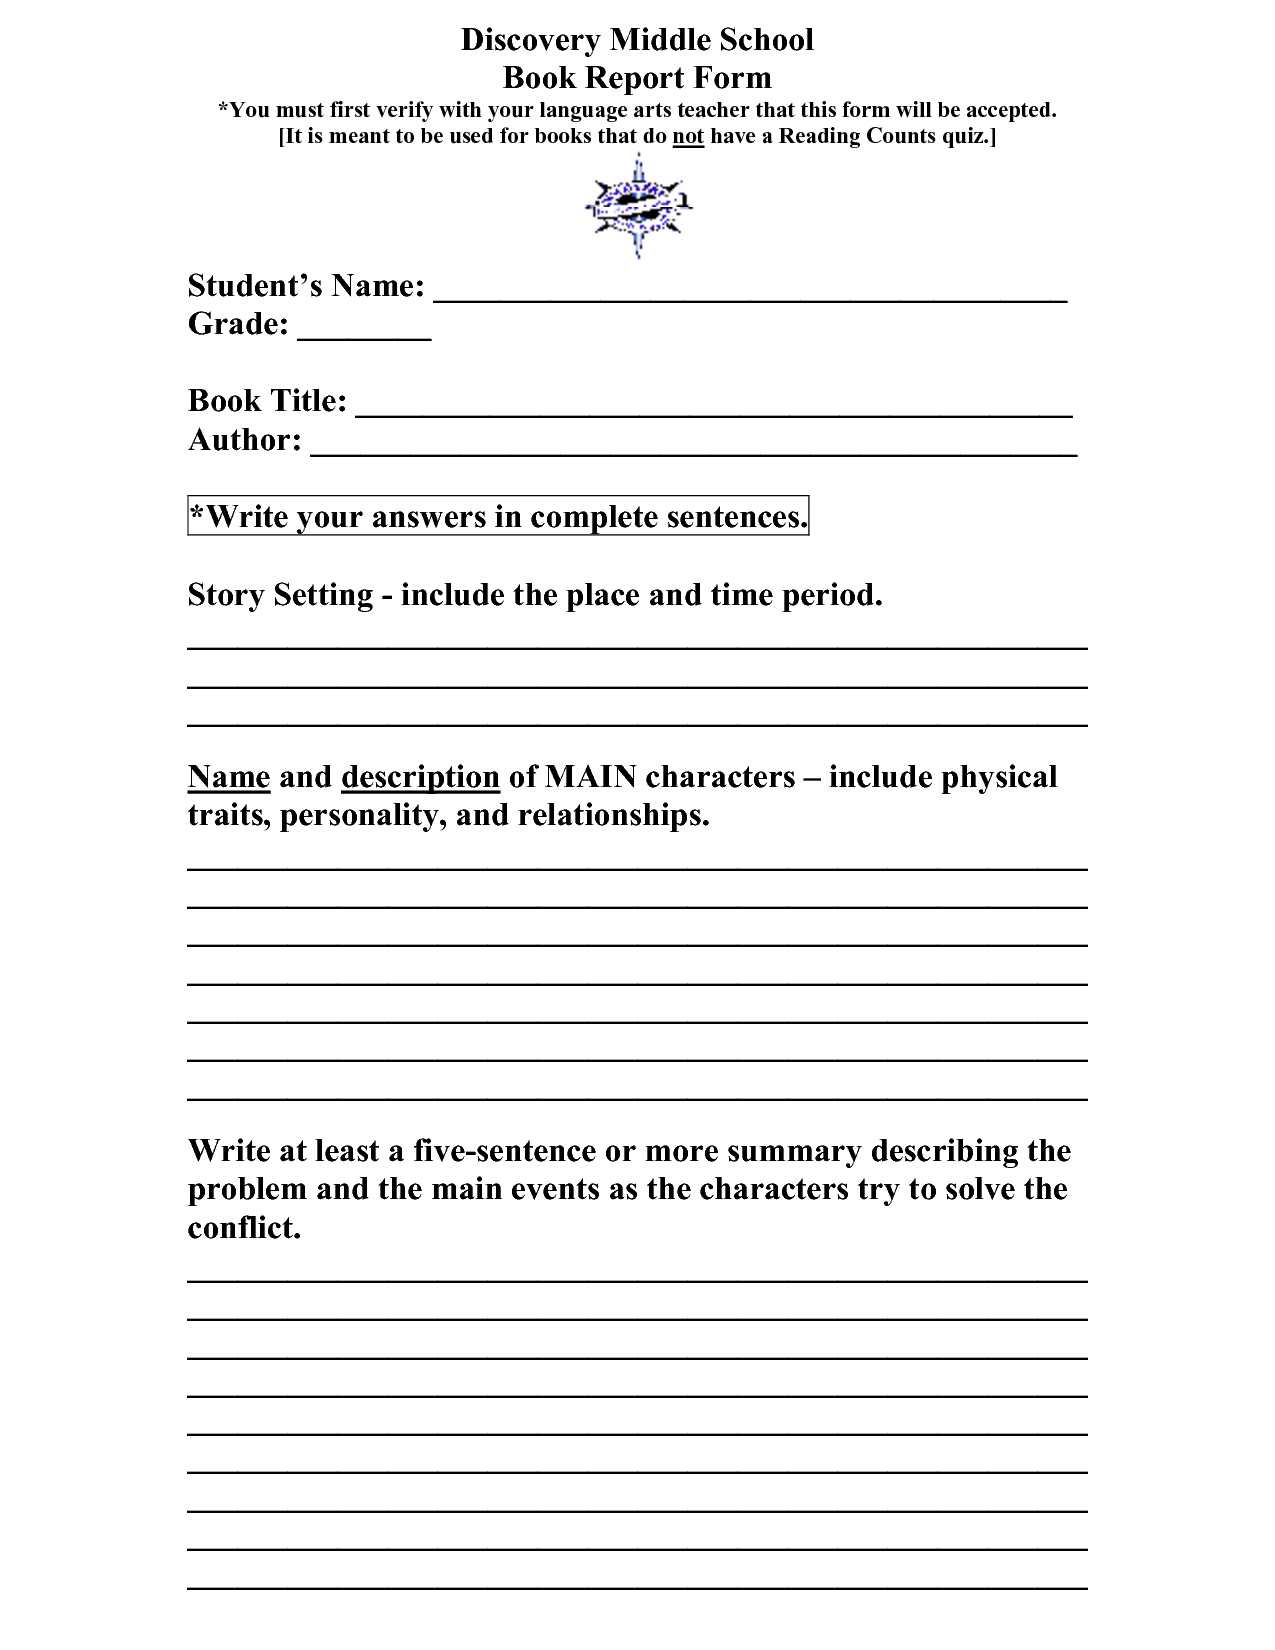 Scope Of Work Template | Teaching & Learning | High School For Middle School Book Report Template